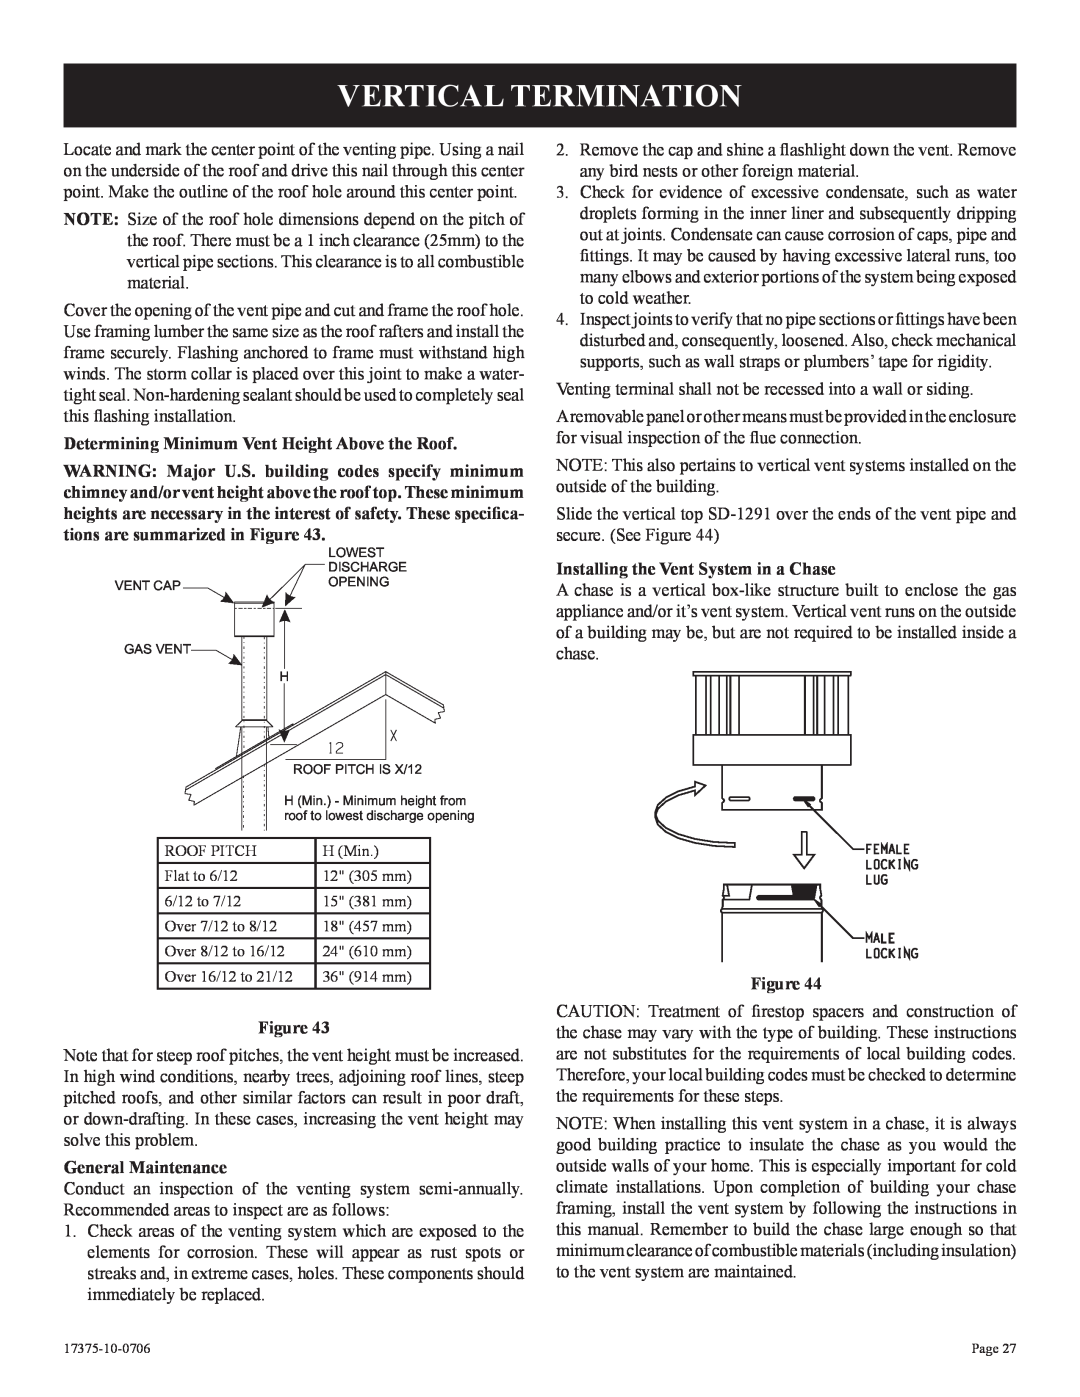 Empire Comfort Systems DVP42FP3(0,1,2,3)(N,P)-1 Vertical Termination, Determining Minimum Vent Height Above the Roof 